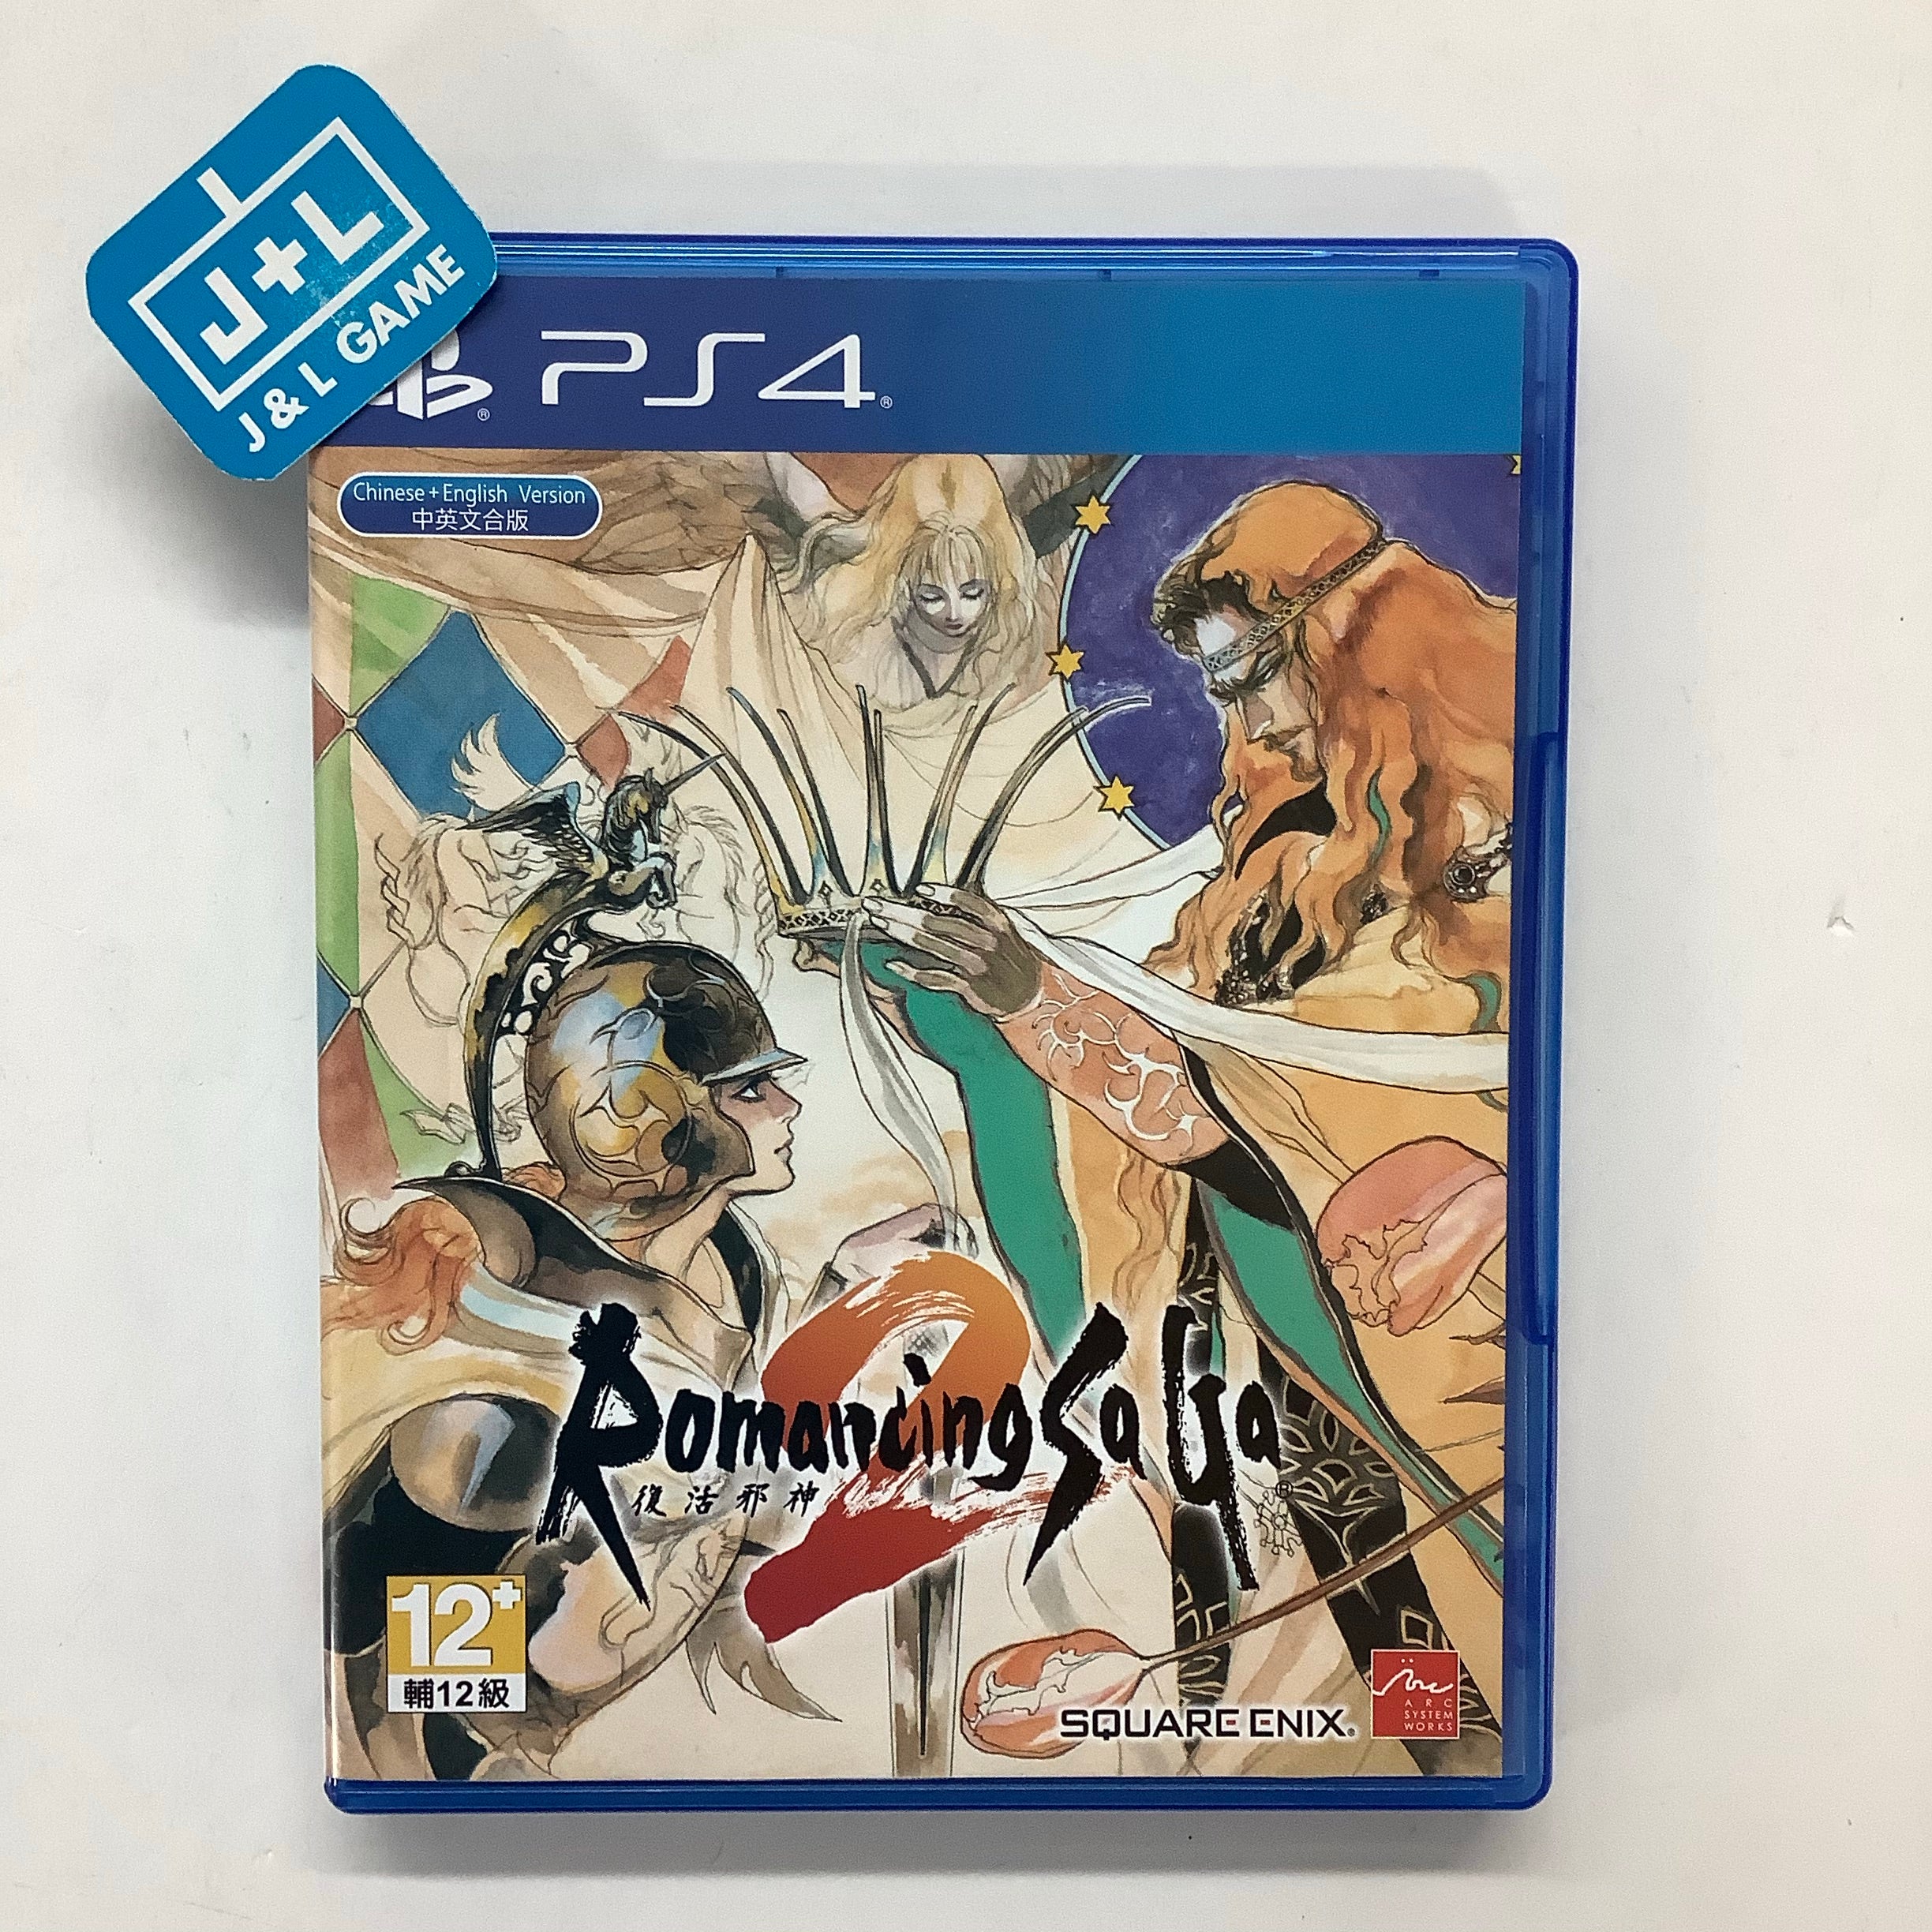 Romancing Saga 2 - (PS4) PlayStation 4 (Asia Import) [UNBOXING] Video Games Square Enix   